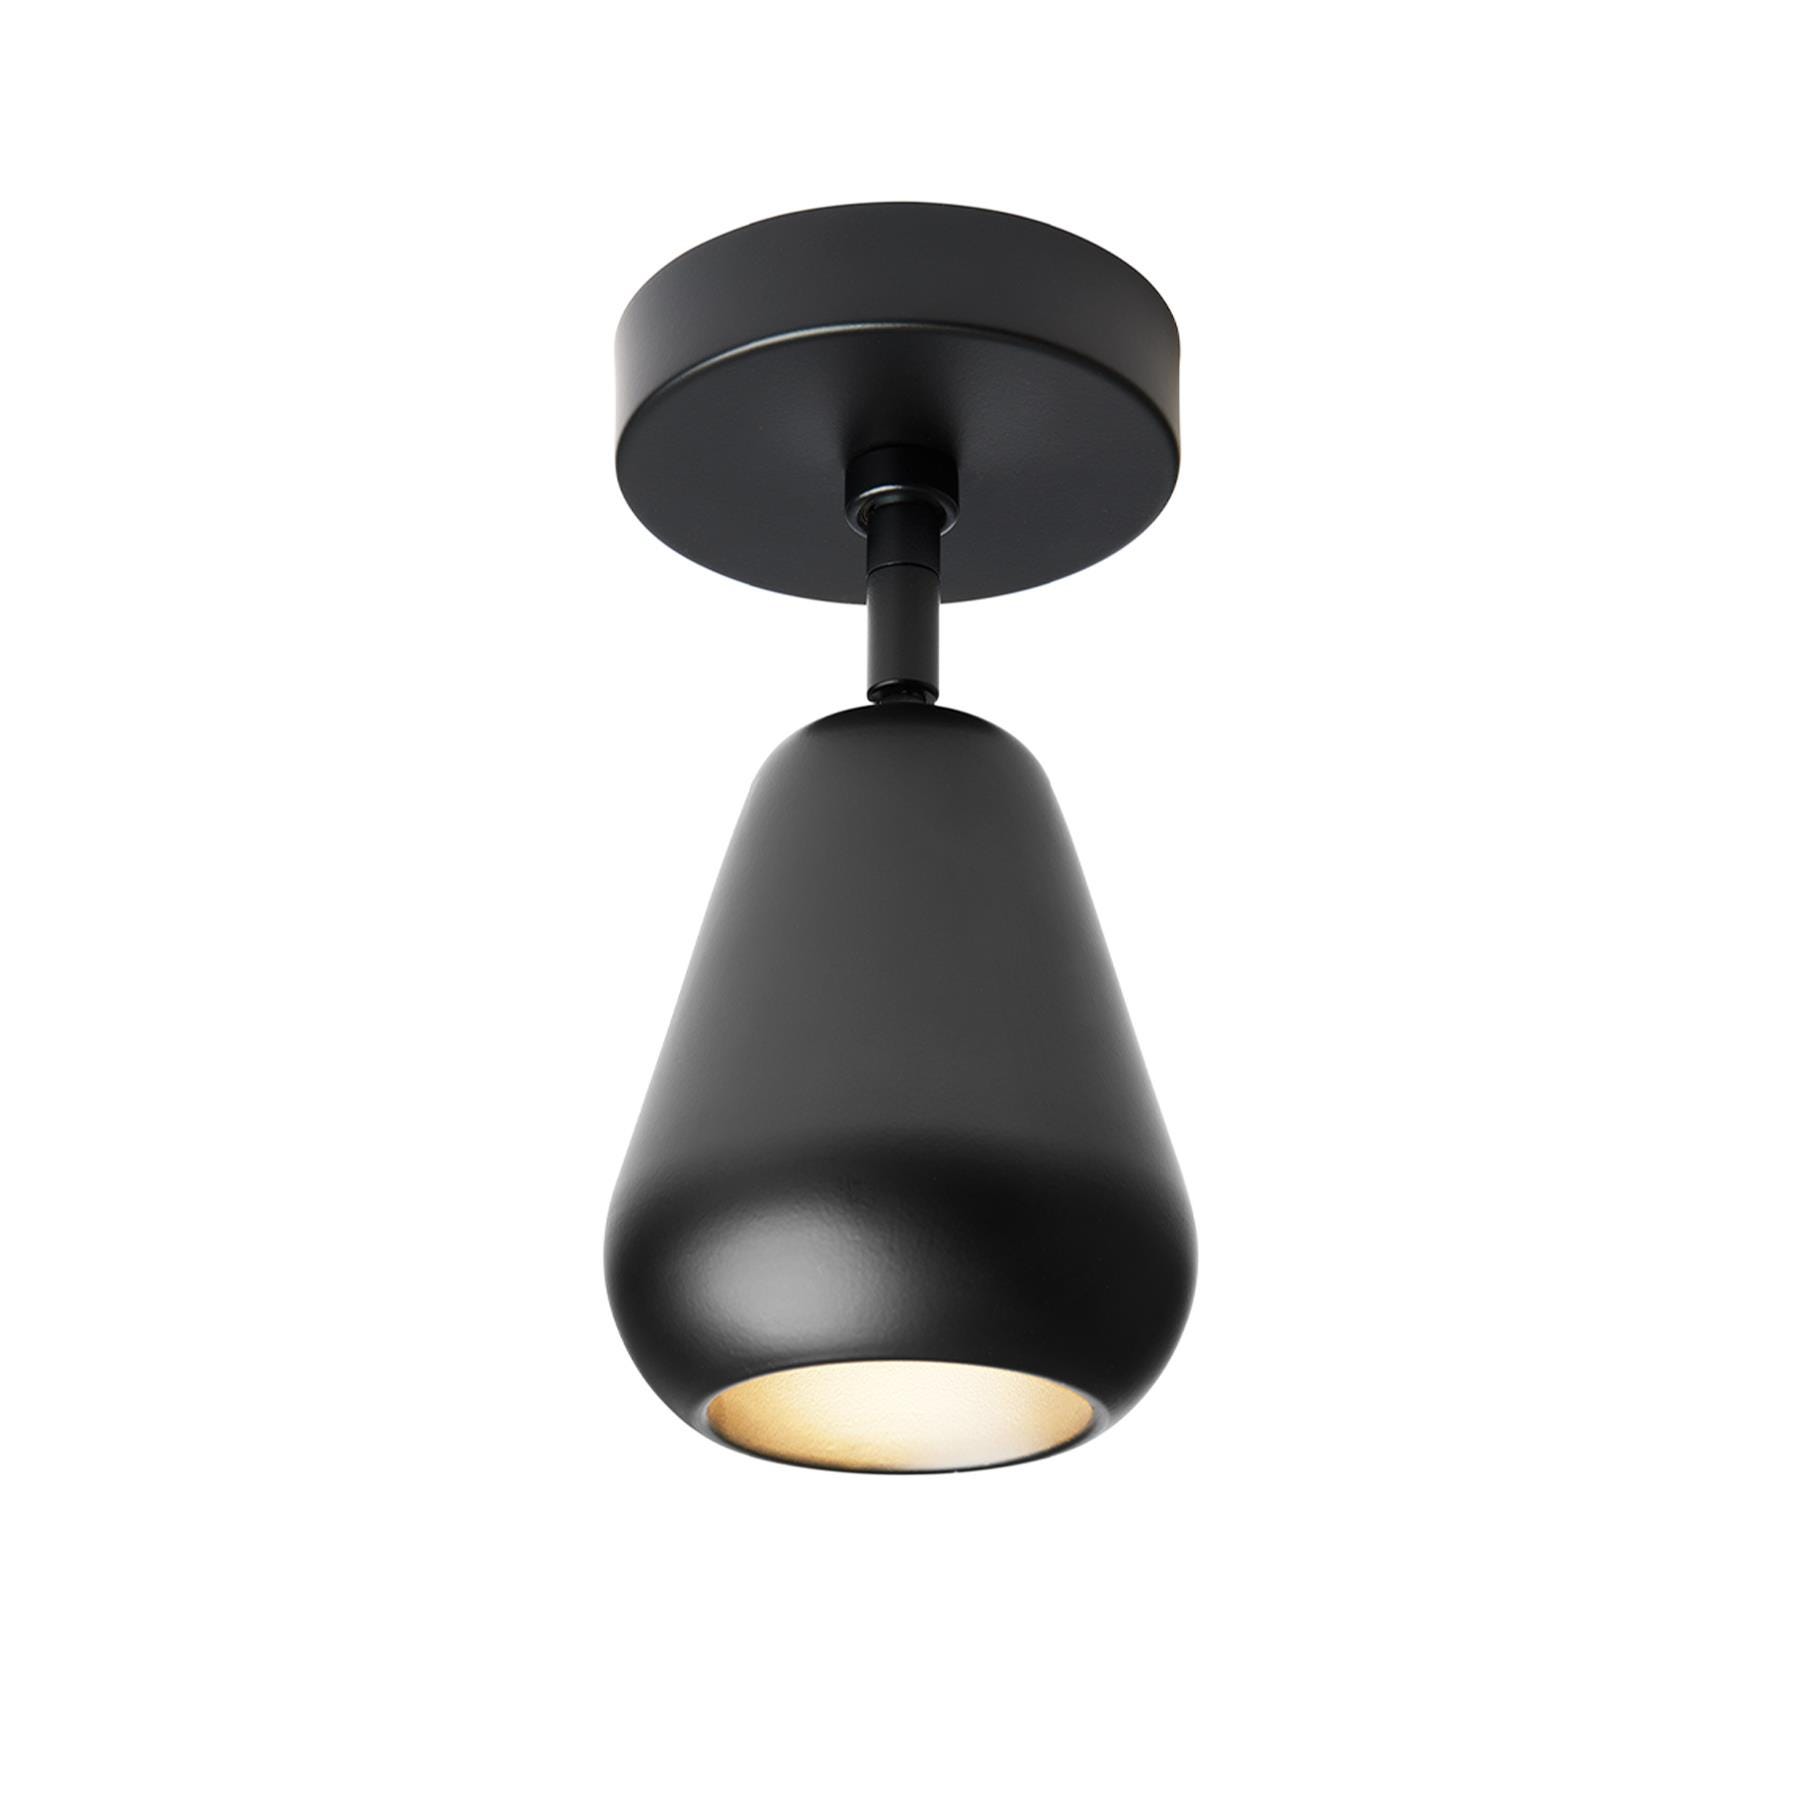 Nuura Anoli Spot Surface Ceiling Wall Light Black With Adjustable Arm